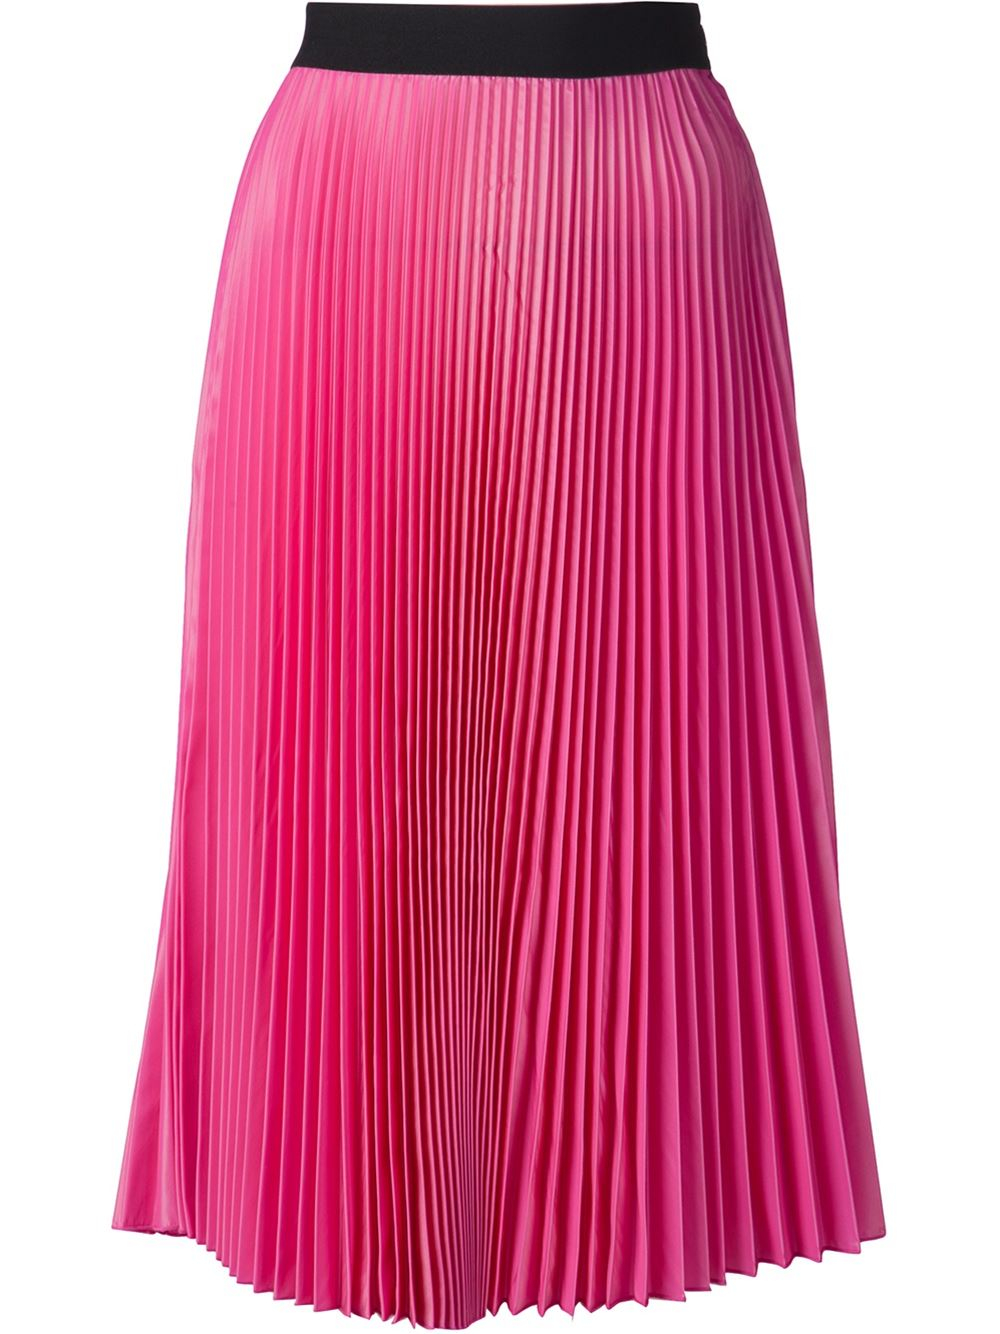 Tome Pleated Skirt in Purple (pink & purple) | Lyst